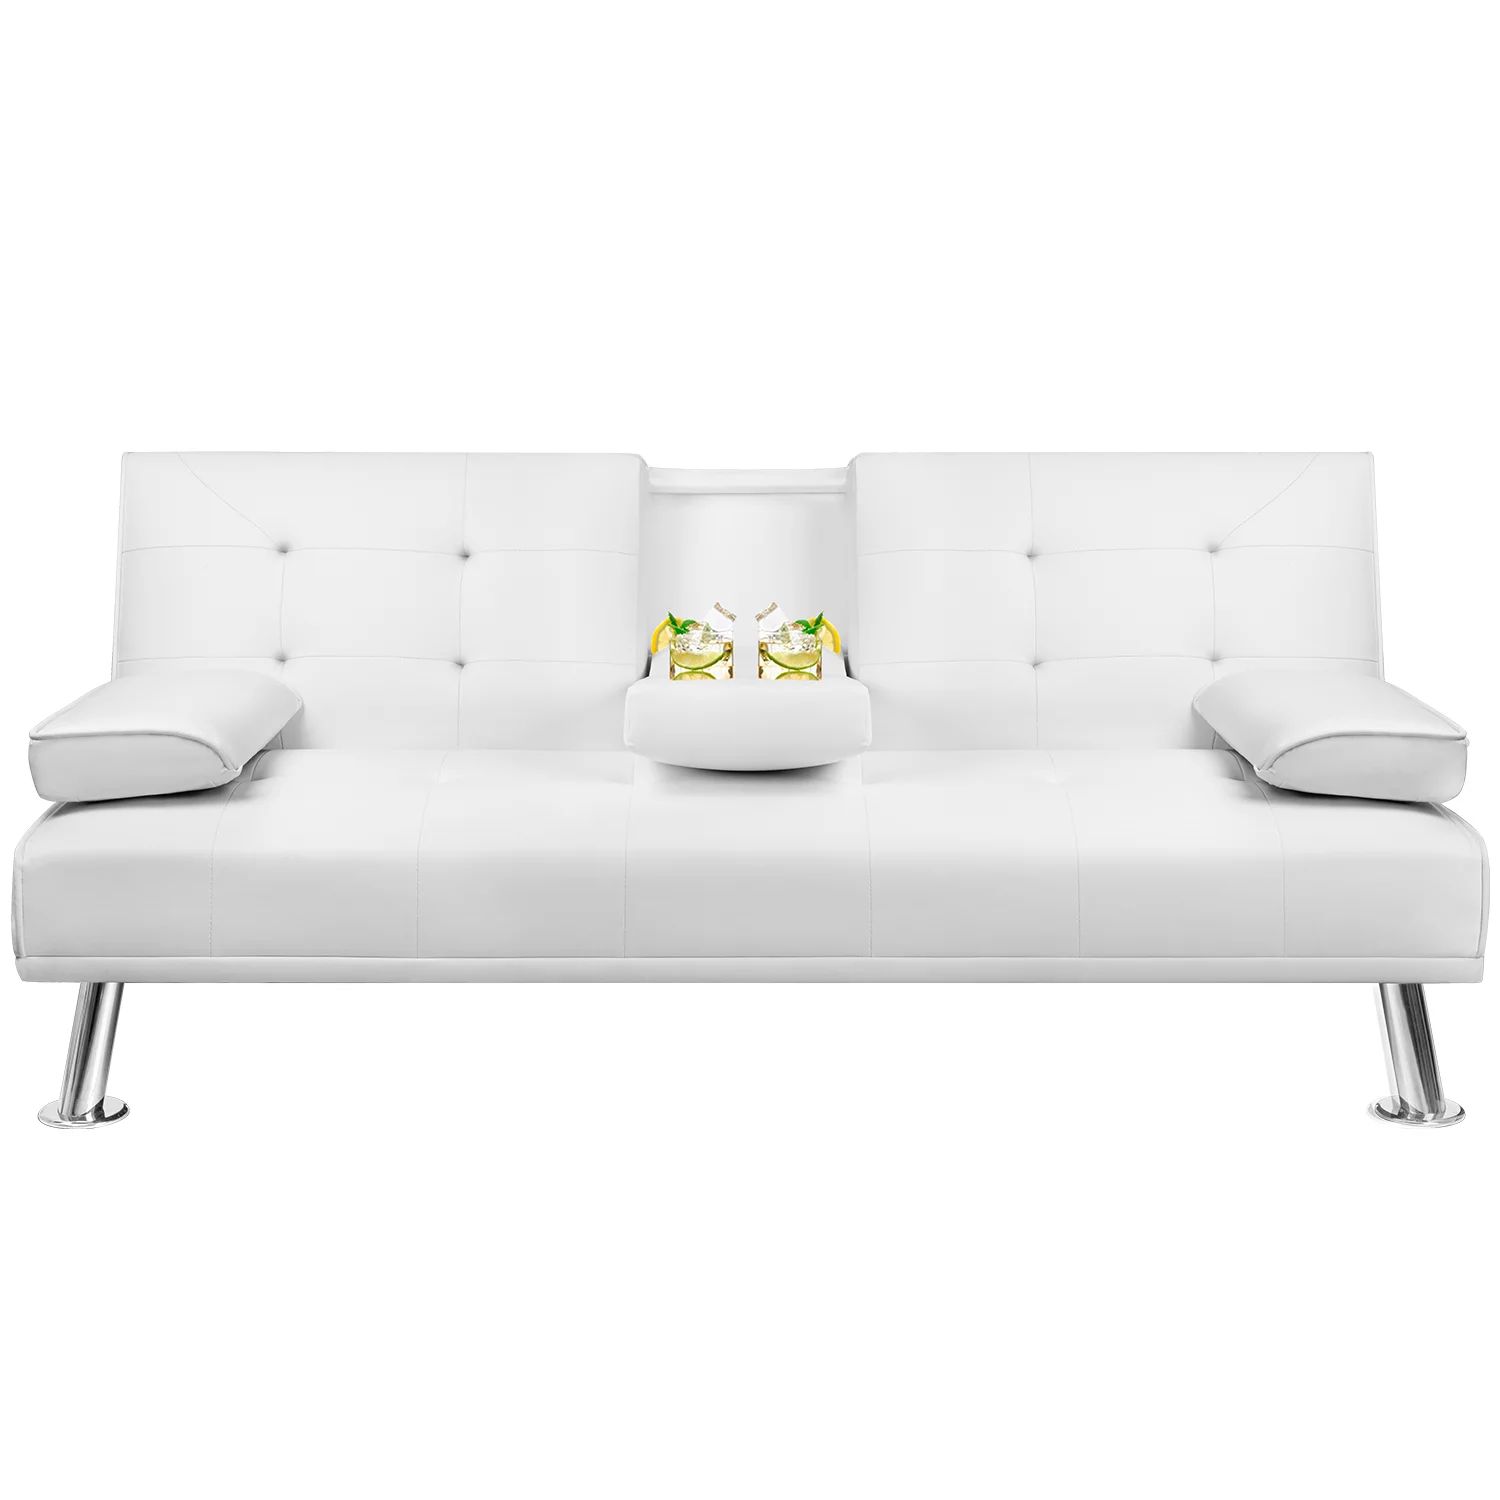 Walnew Modern PU Leather Convertible Futon with Cupholders & Pillows, White | Walmart (US)